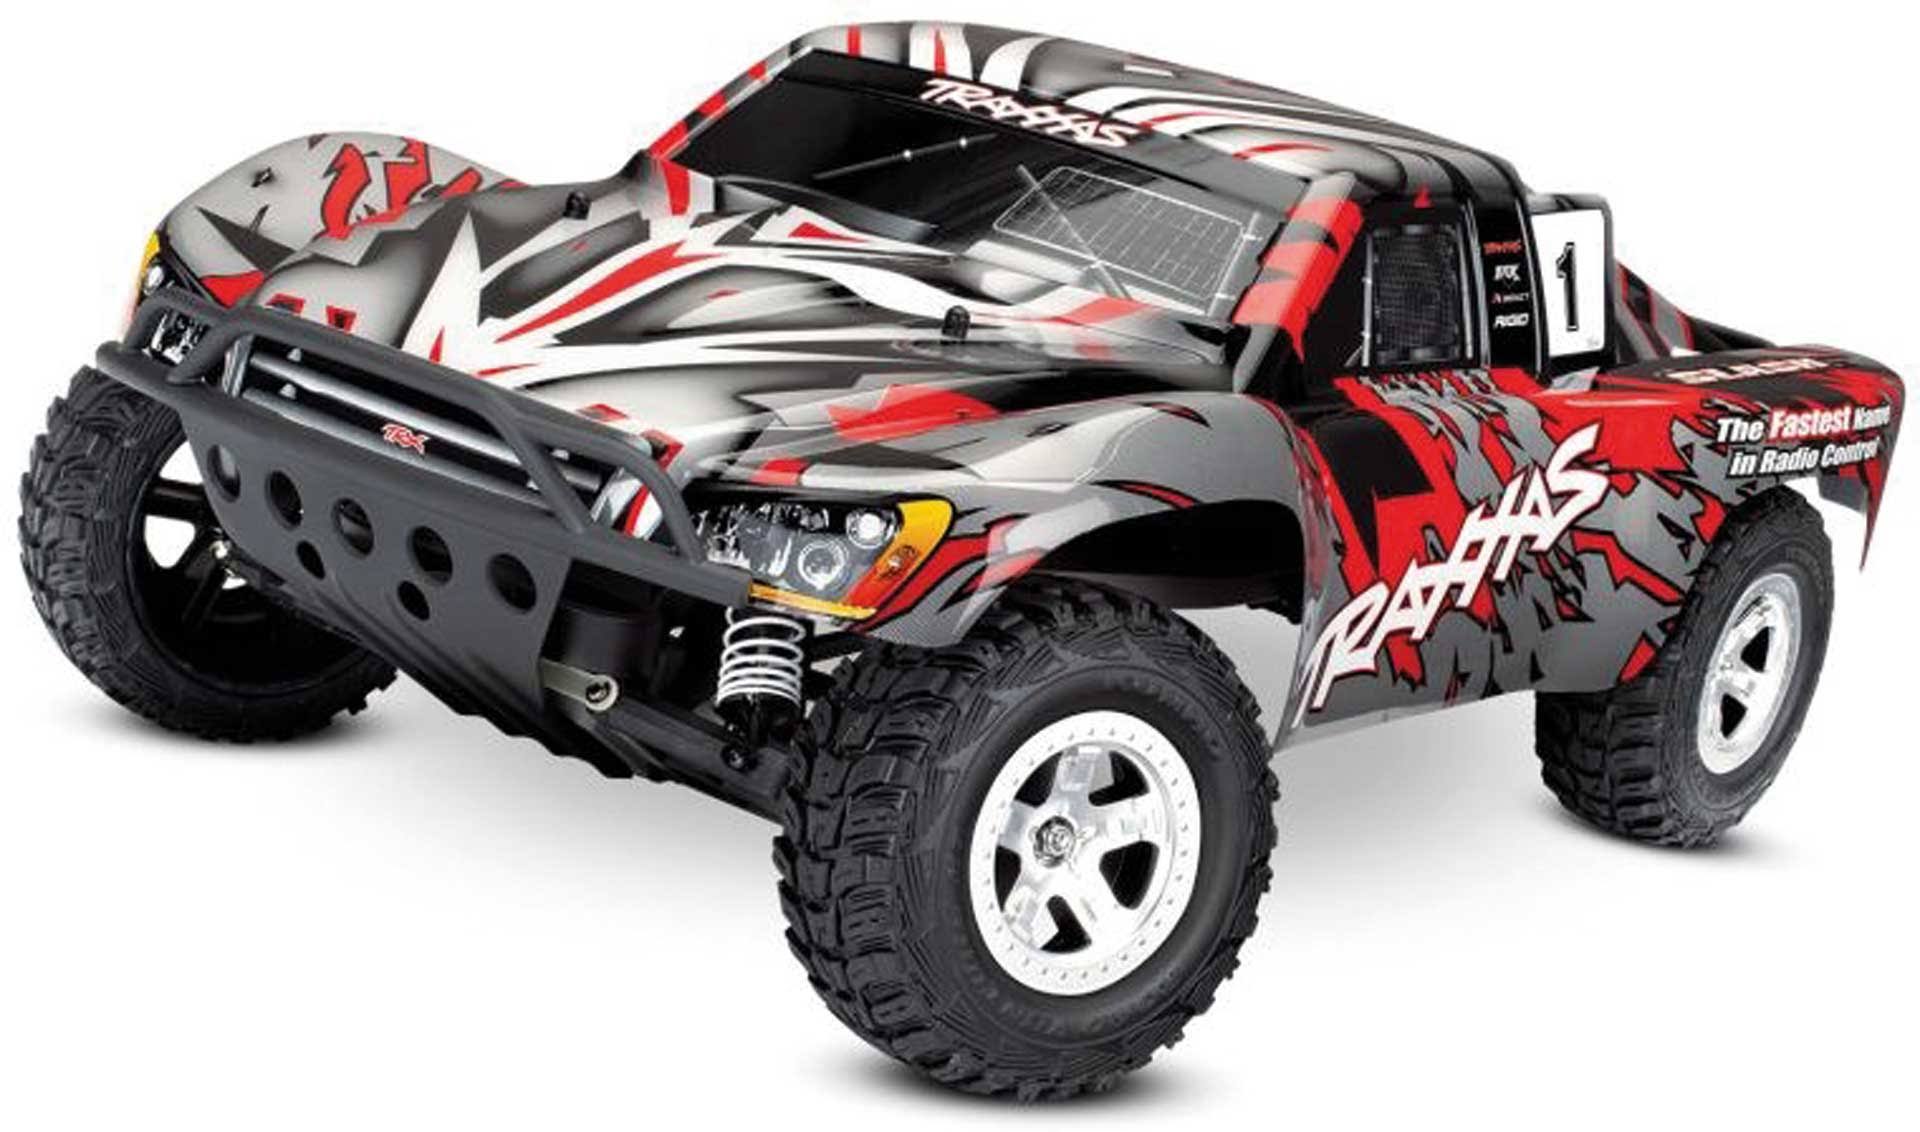 Traxxas 1/10 Slash 2WD RTR Short Course Truck - Red